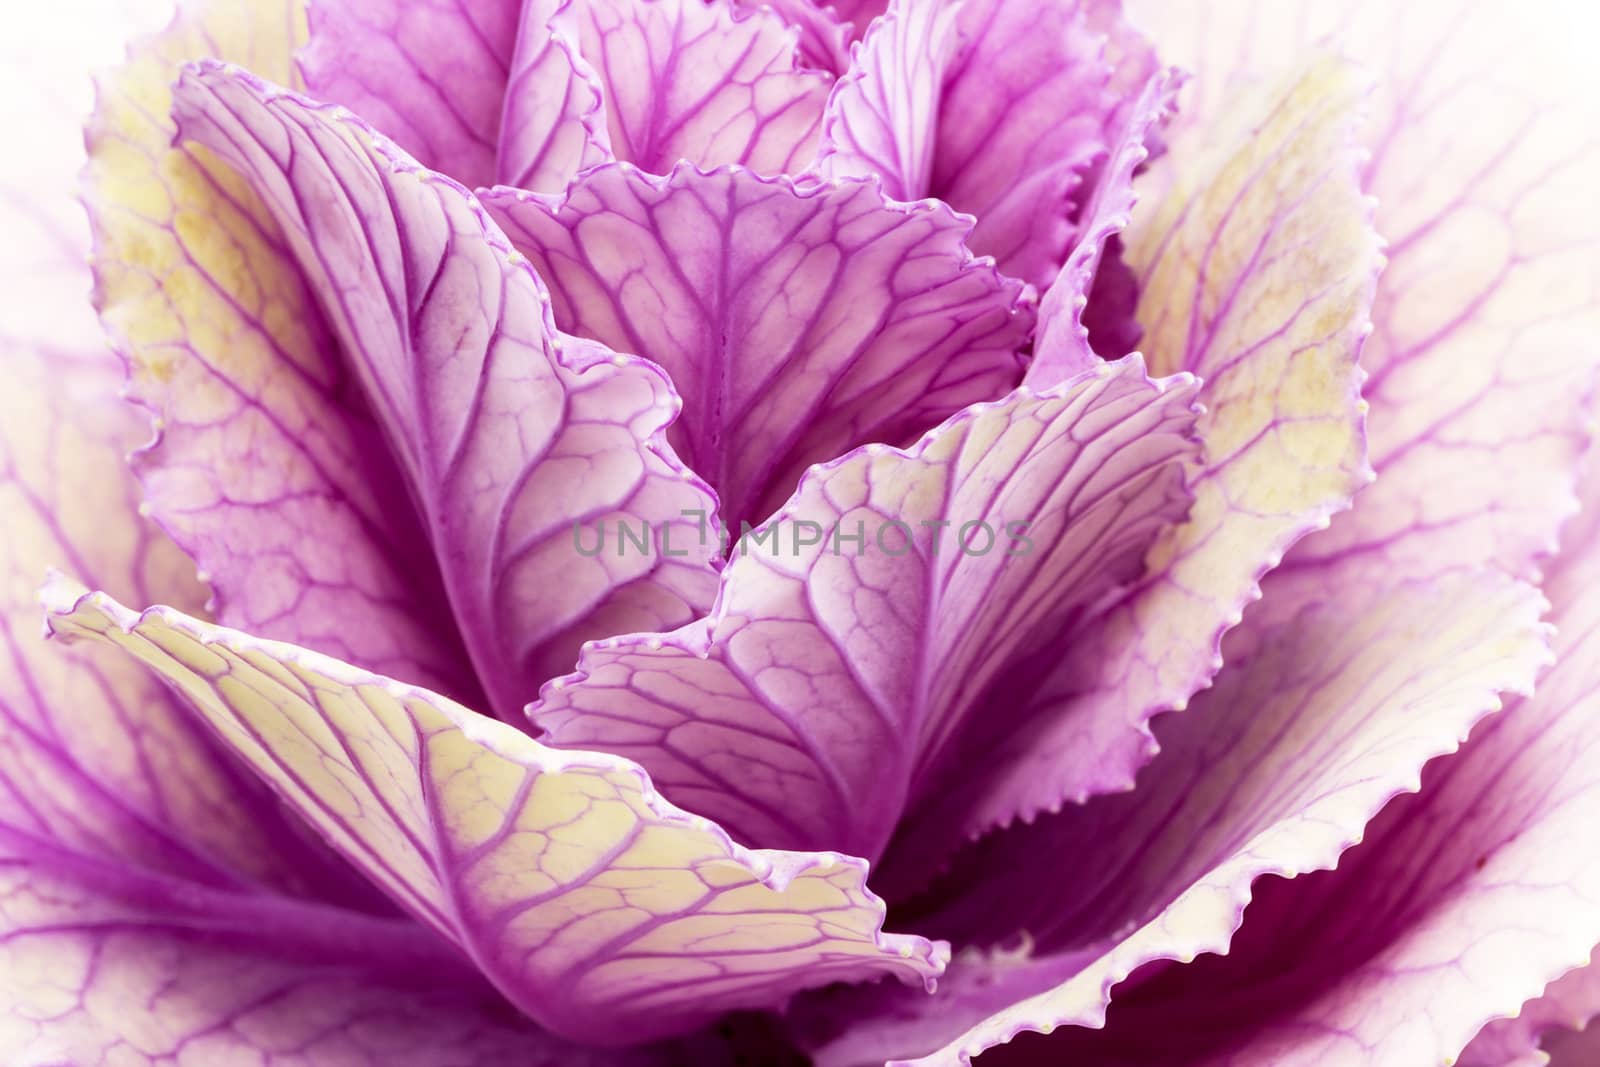  Single flower of violet  brassica oleracea - close up by mychadre77